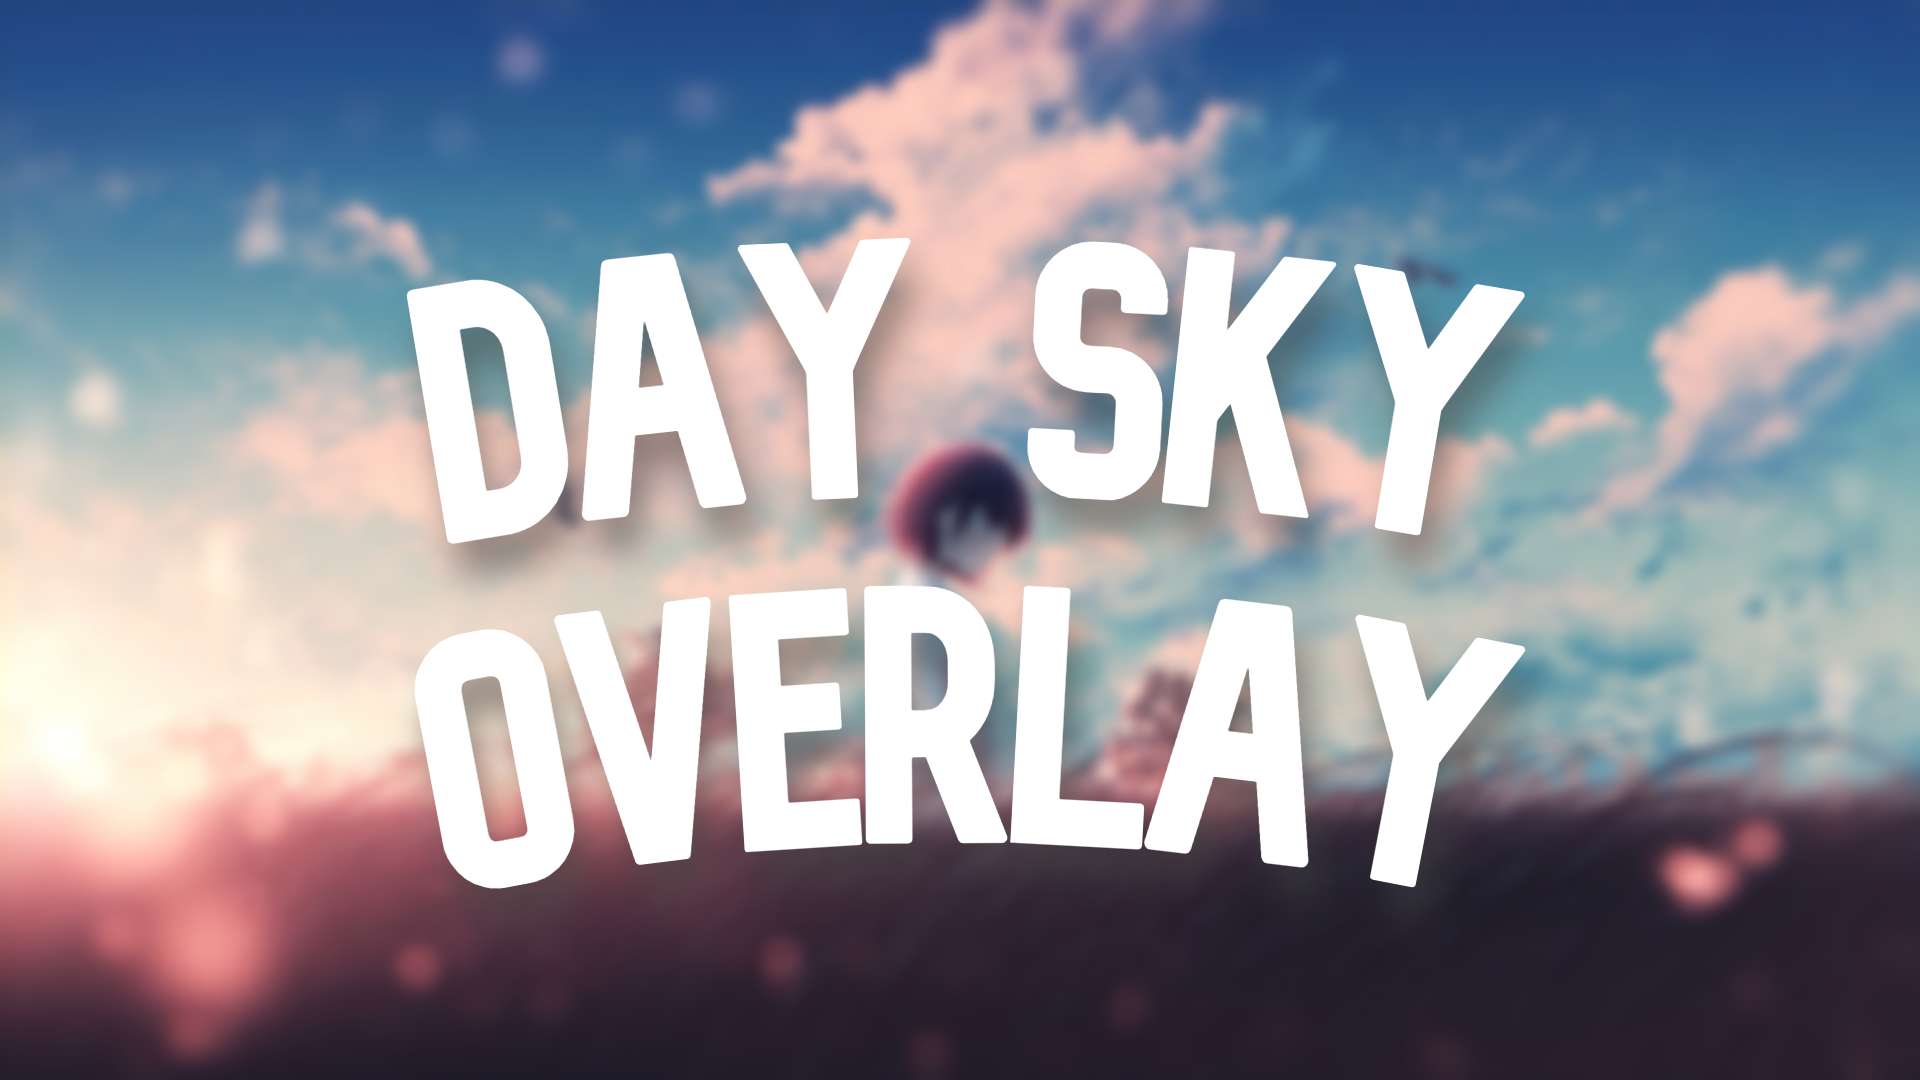 Day Sky Overlay #6 16x by Rh56 on PvPRP